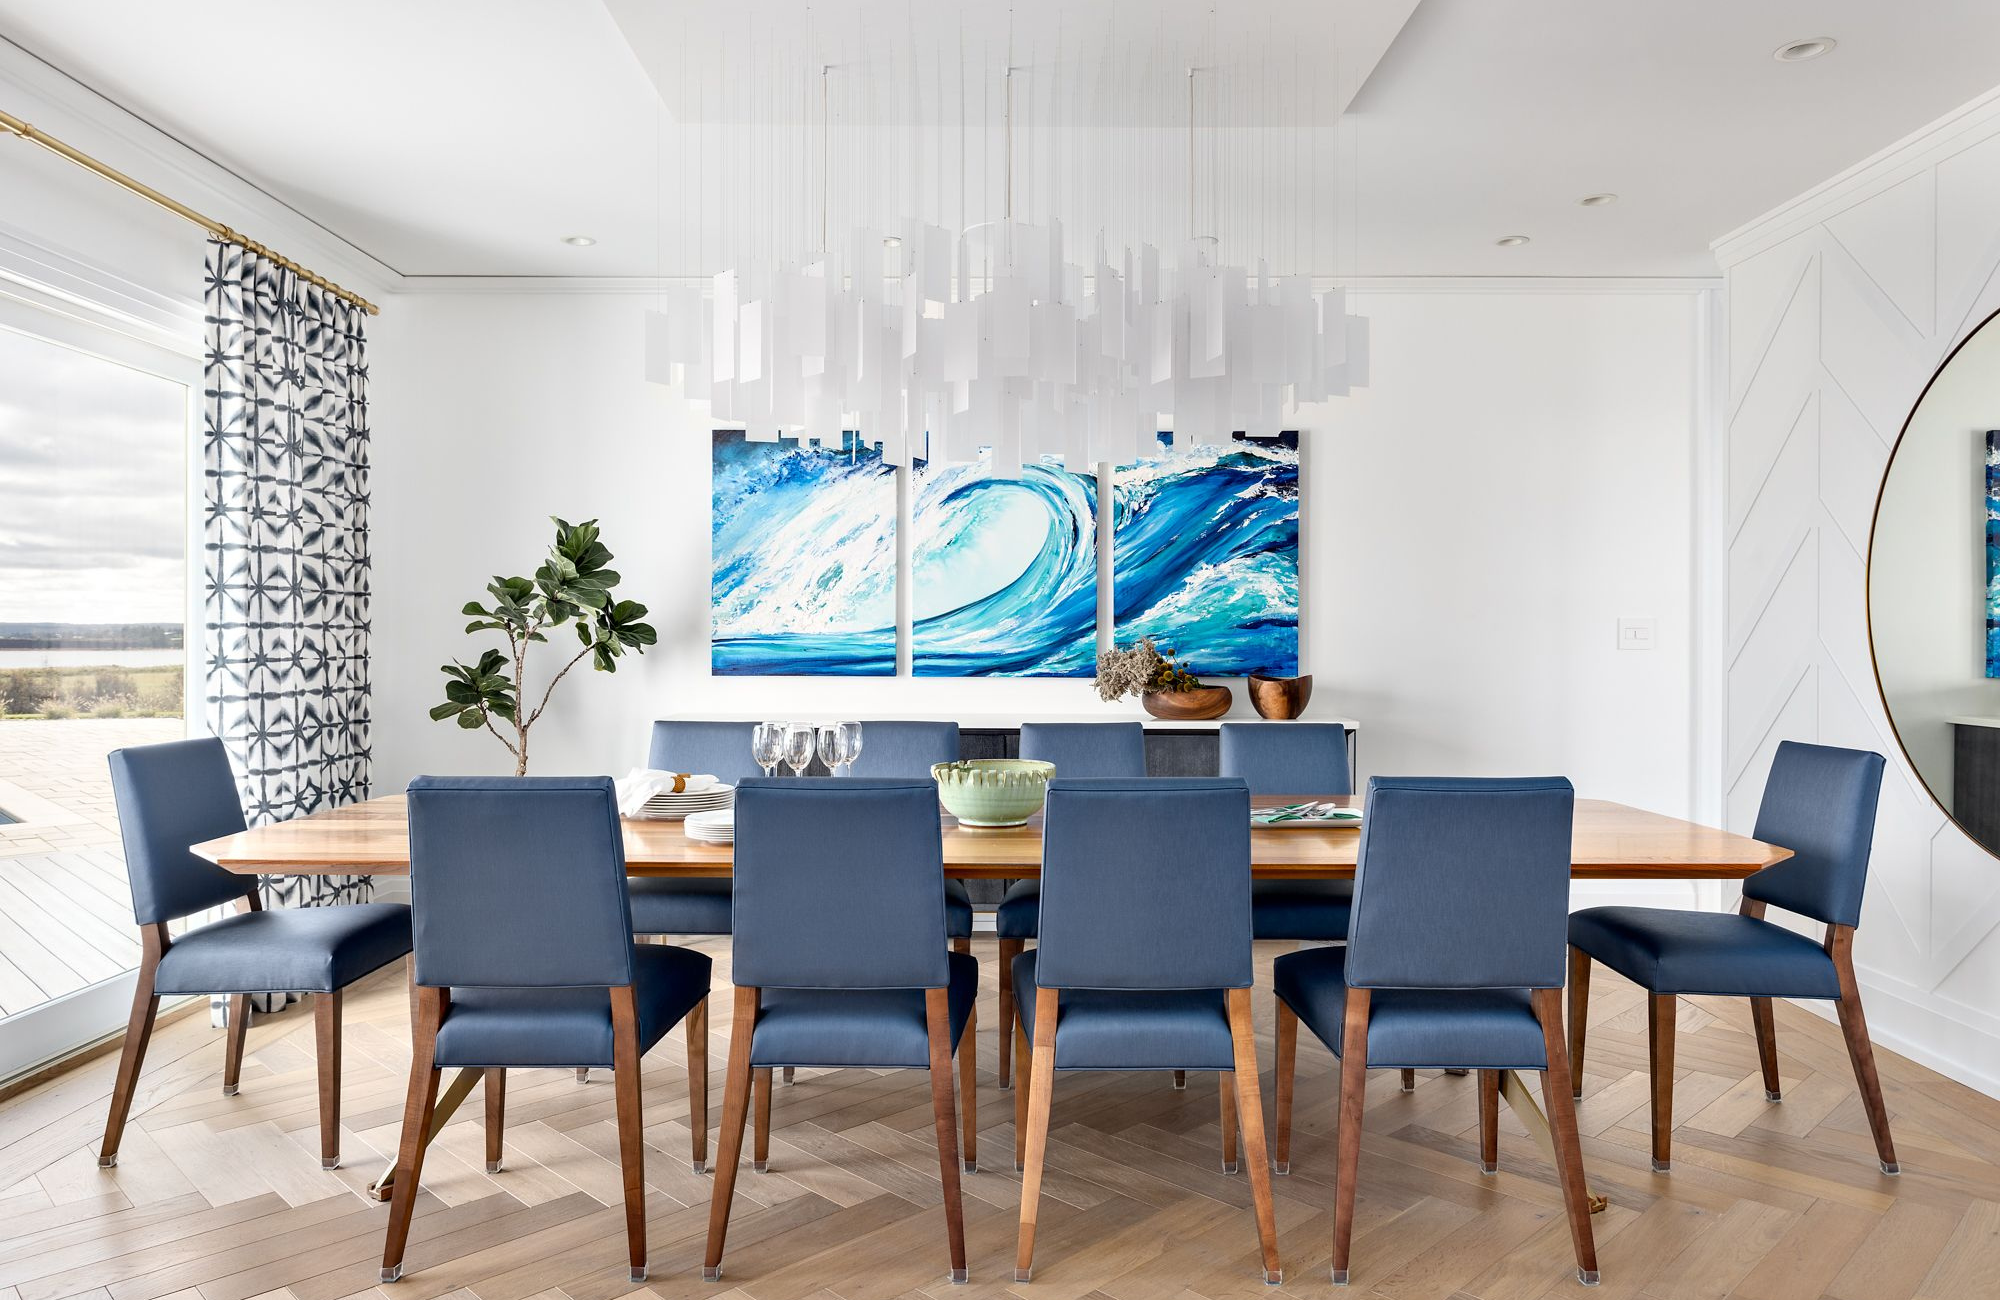 simply-home-decorating-island-home-design-east-coast-meets-west-coast-modern-large-dining-room-white-oak-floor-navy-blue-chairs